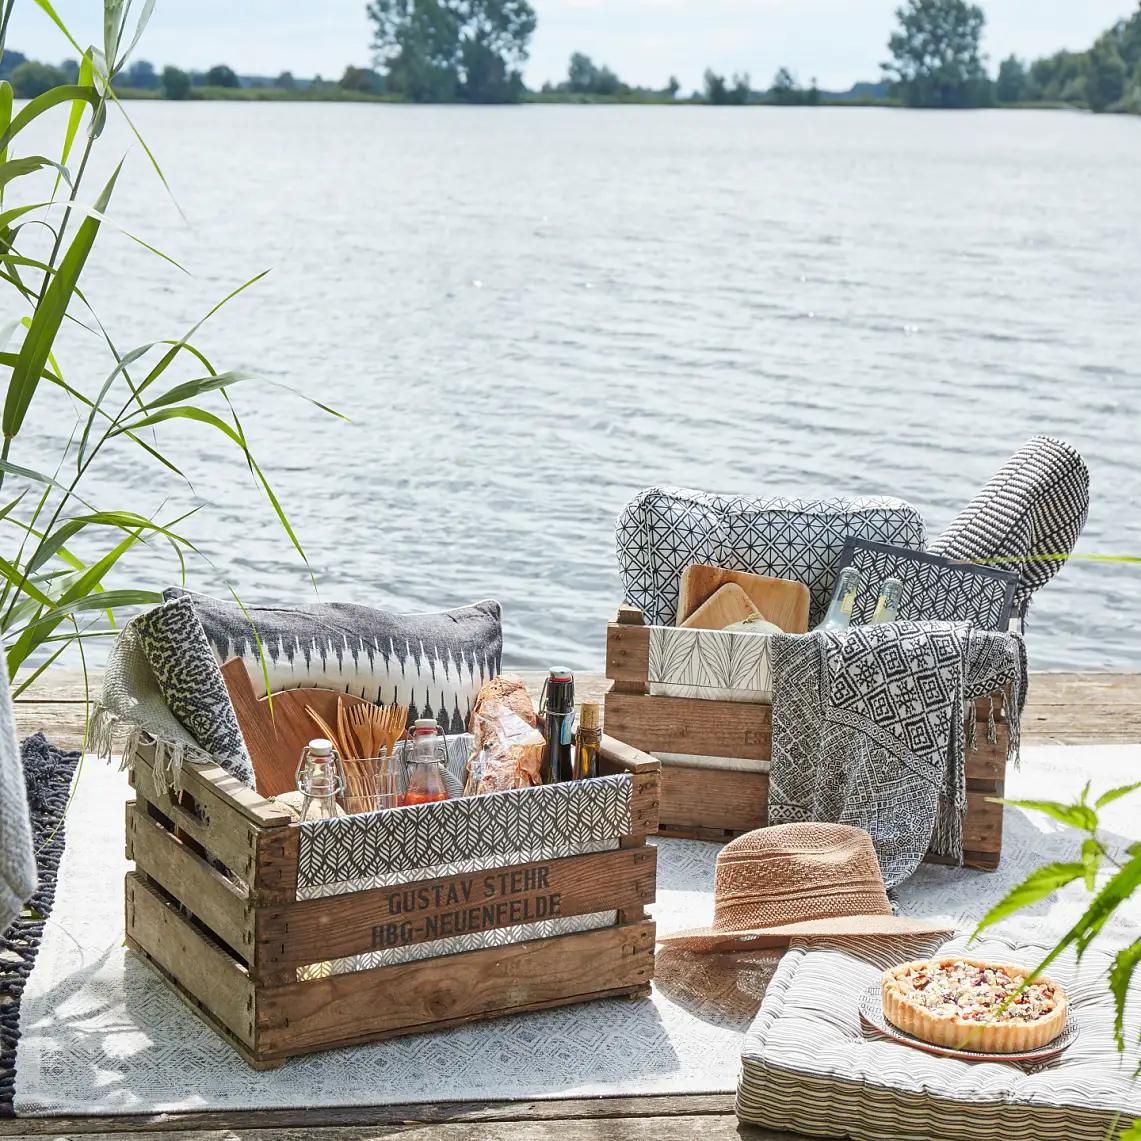 Picnic Basket in the Summer